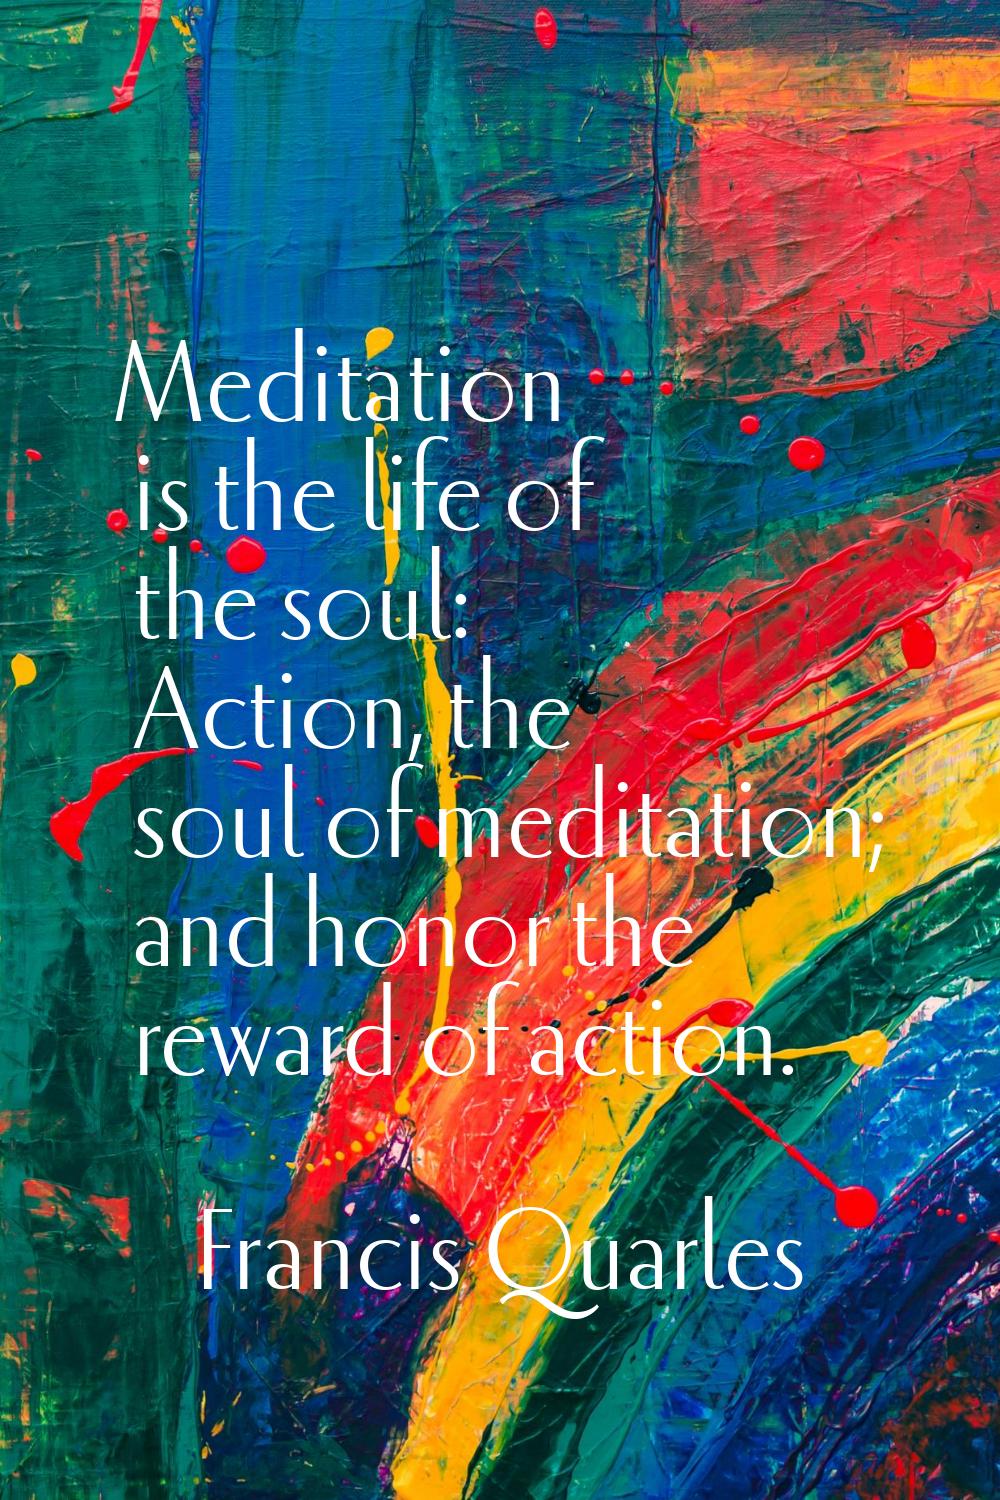 Meditation is the life of the soul: Action, the soul of meditation; and honor the reward of action.